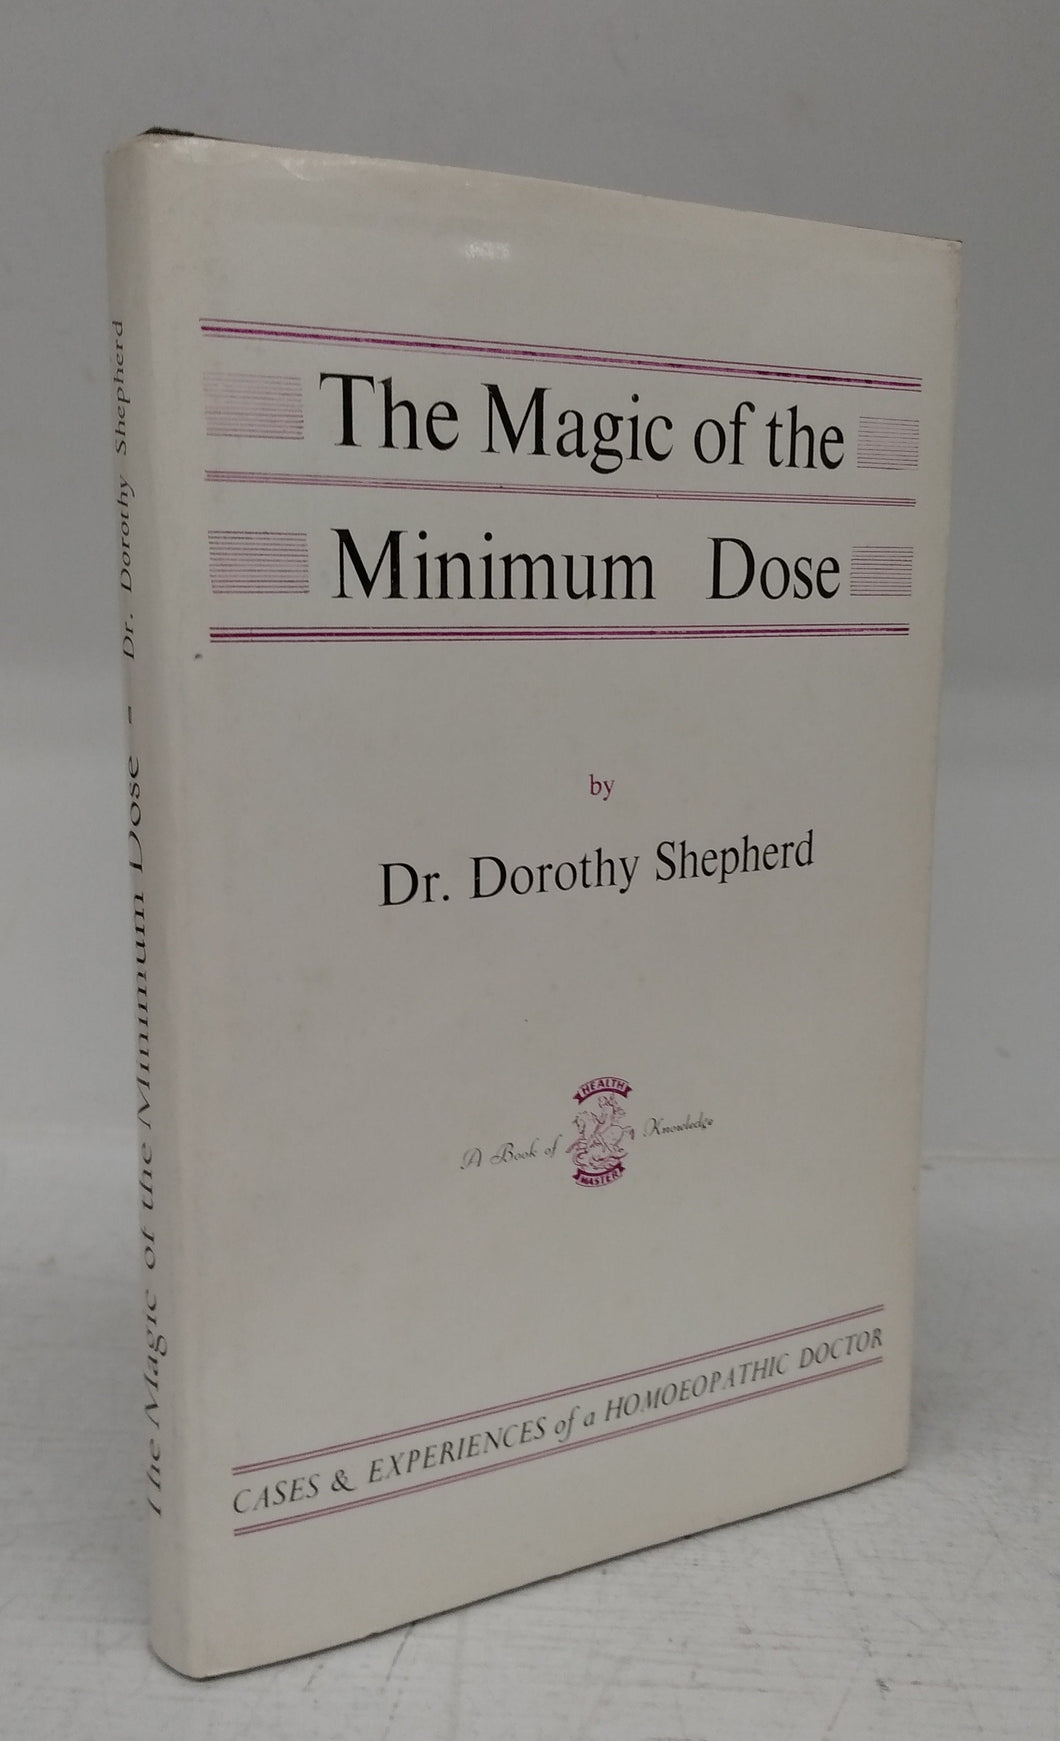 The Magic of the Minimum Dose: Experiences and Cases